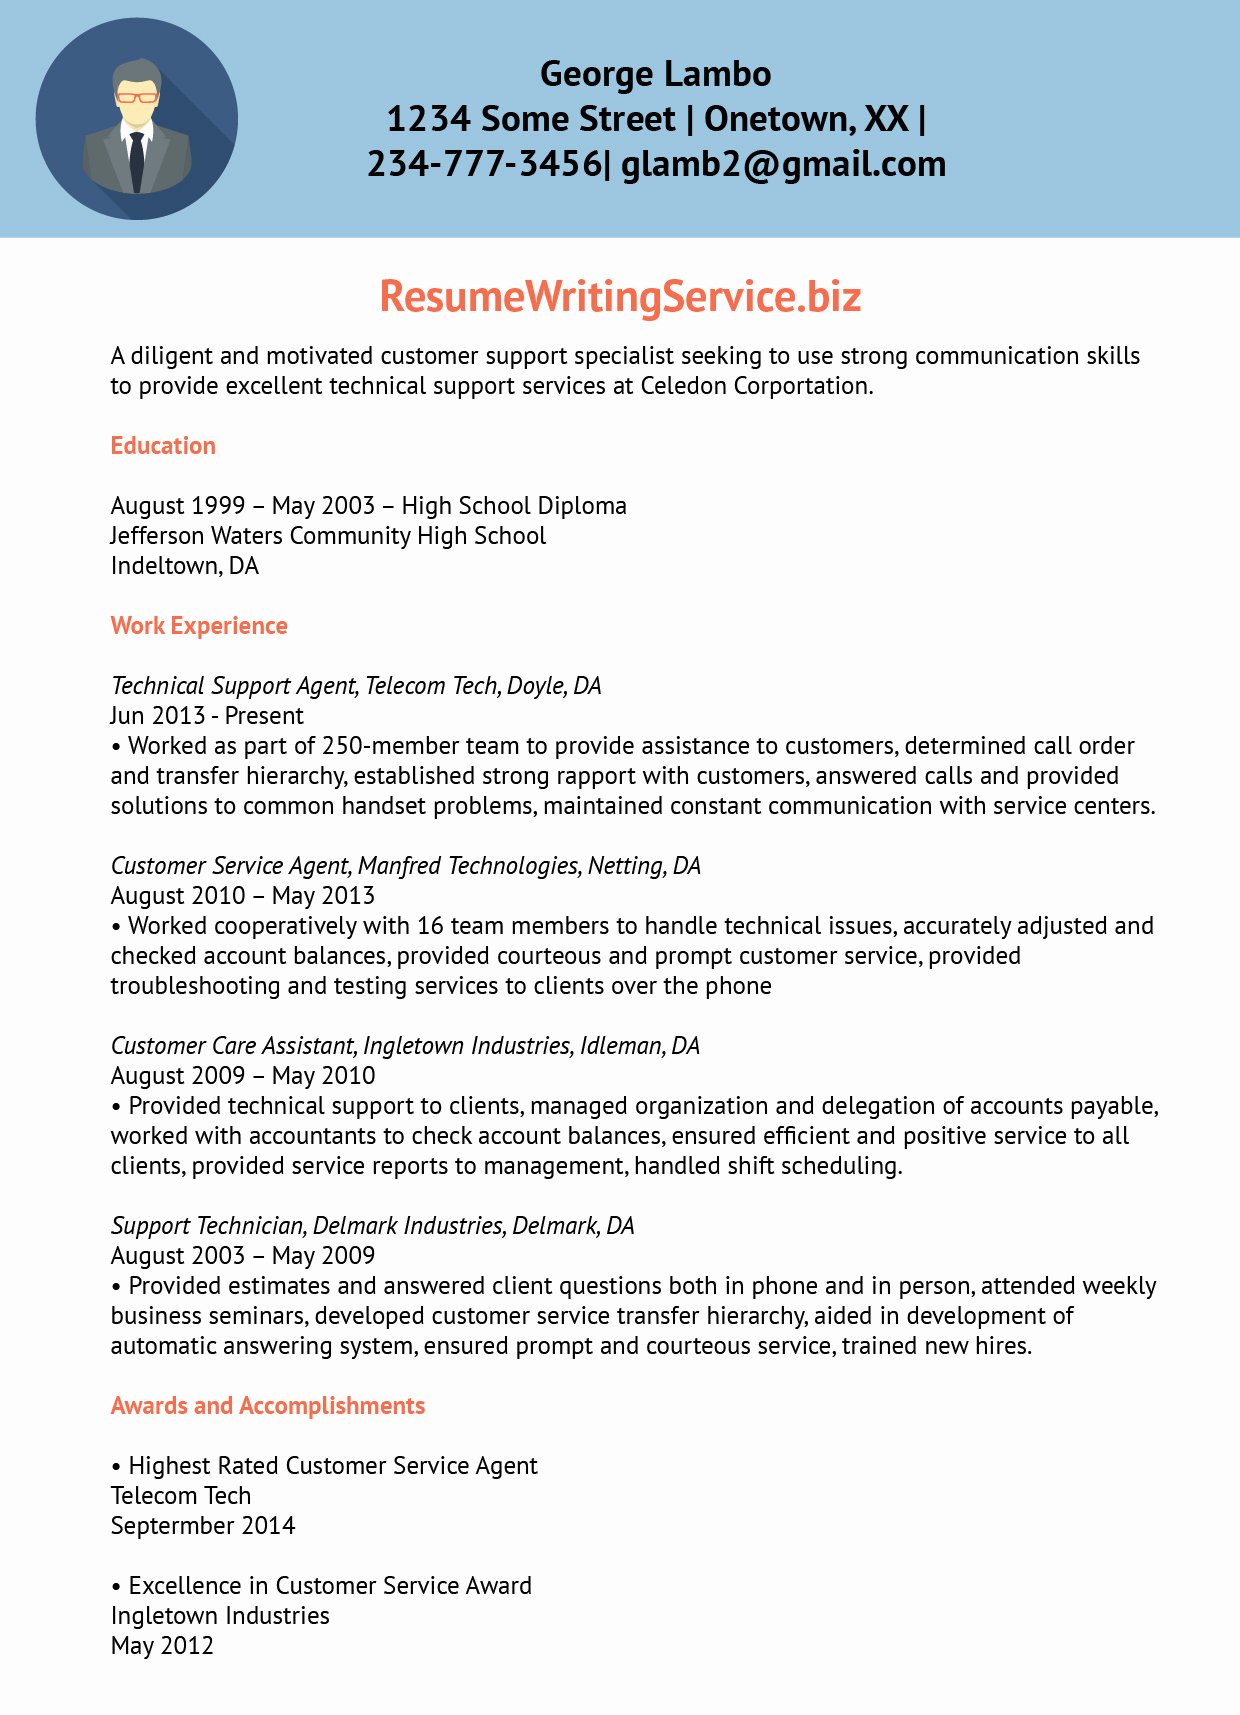 Technical Resume Services